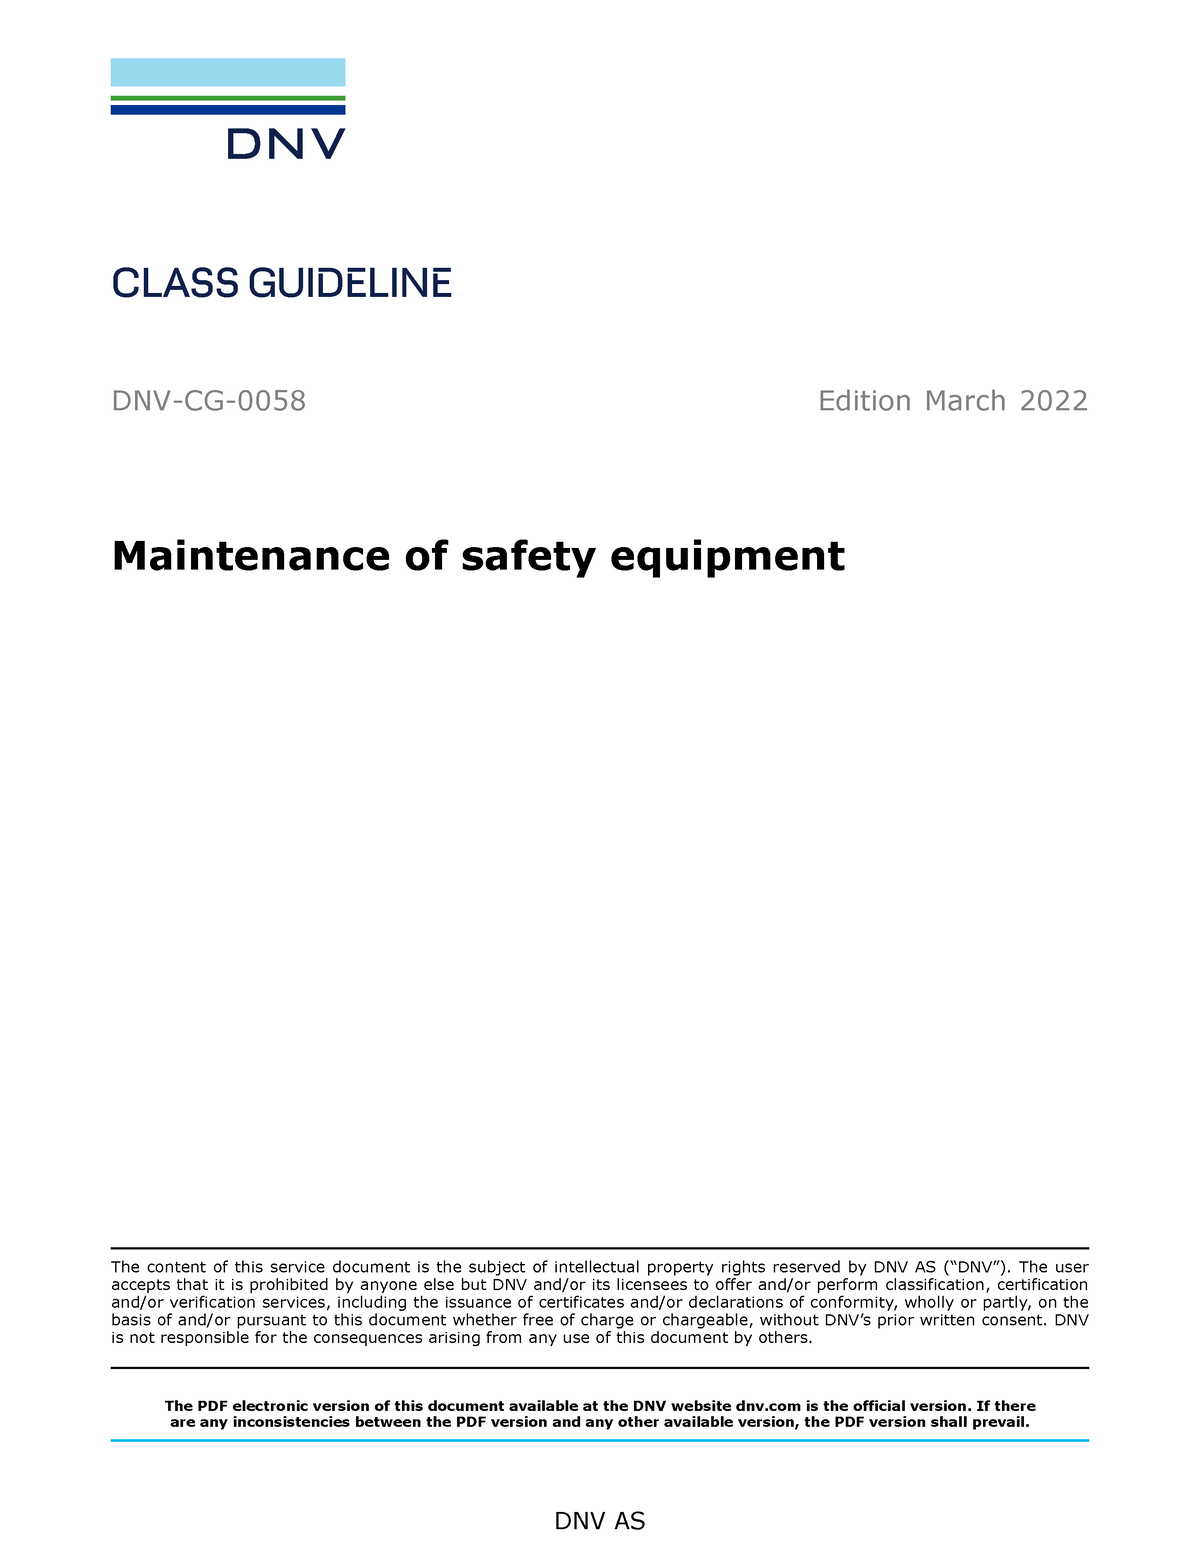 [DNV] Class Guideline Maintenance of Safety Equipment (2022) CLASS